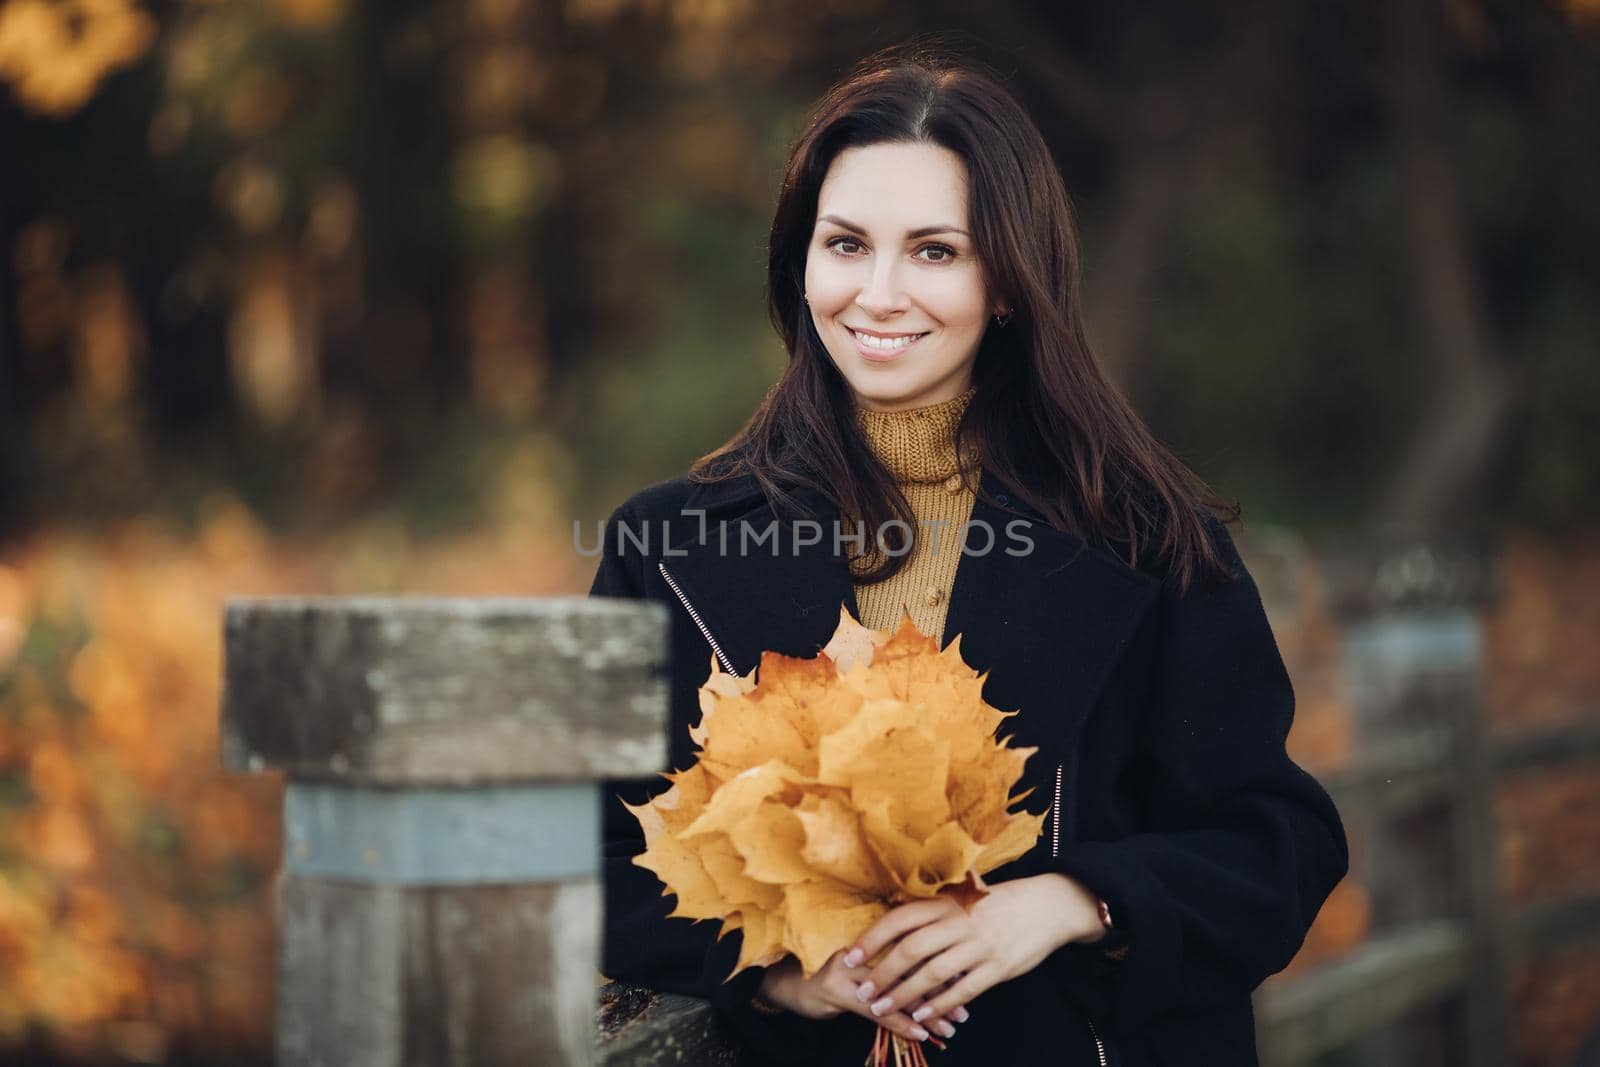 Cheerful young caucasian female with dark hair in brown blouse and black coat smiles outside